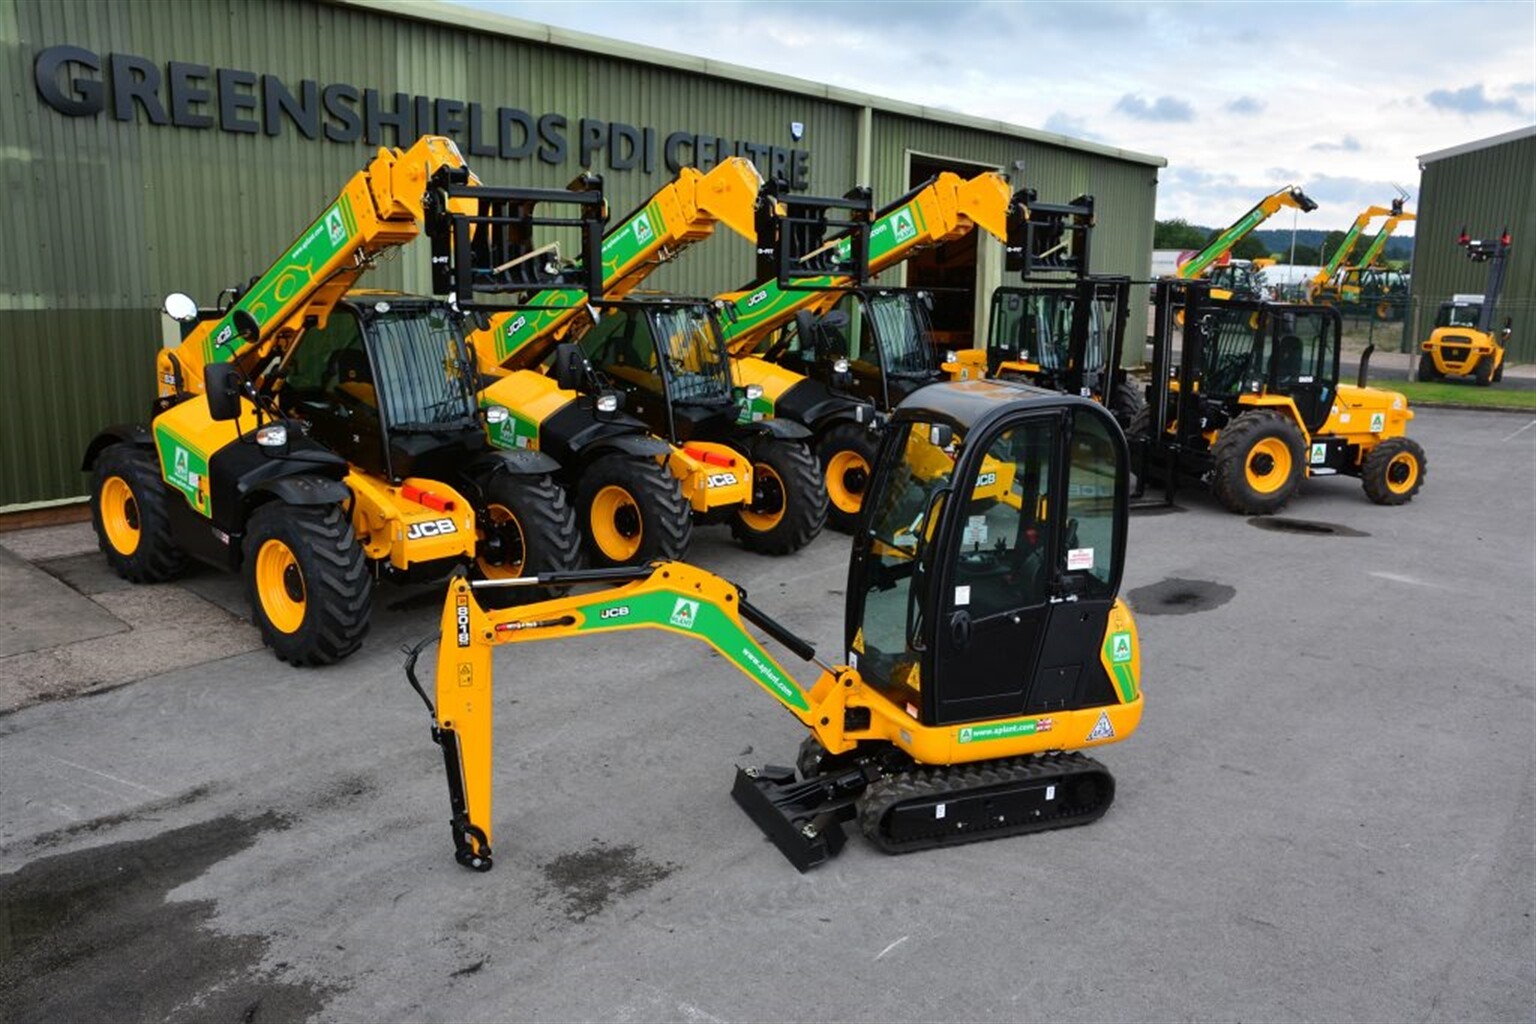 A-Plant gears up with 55 million order for JCB kit